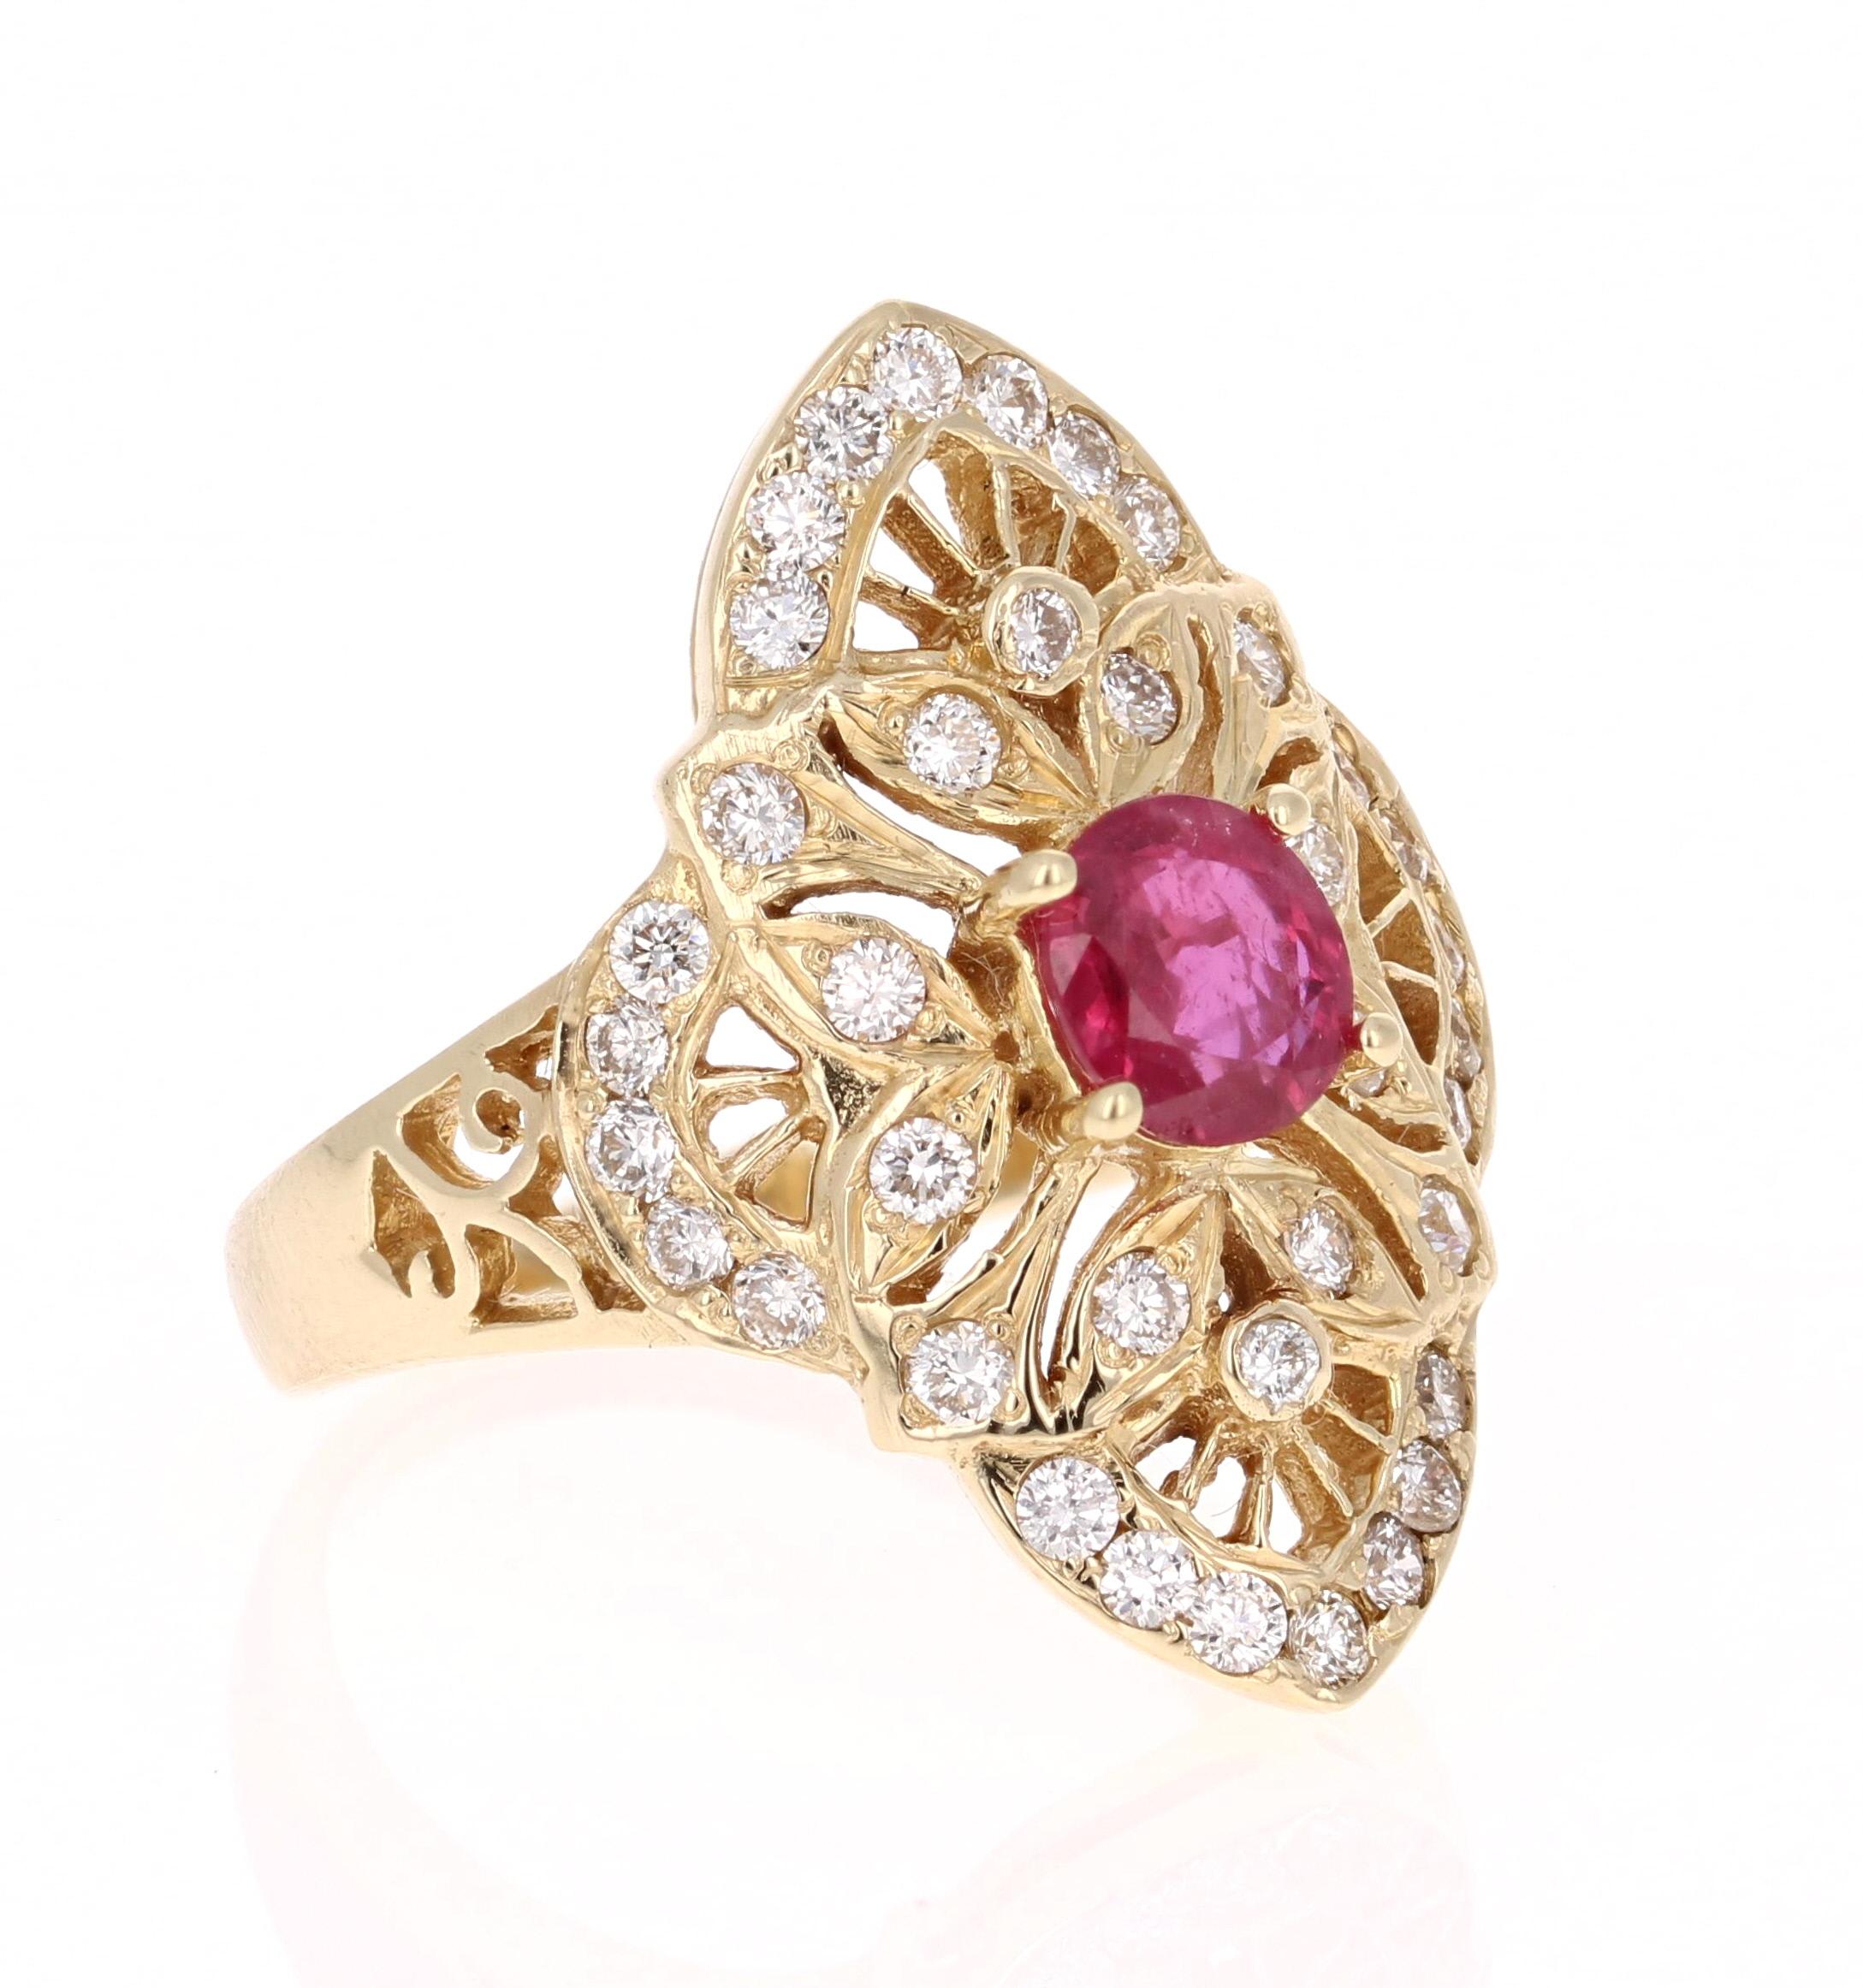 This Art-Deco Inspired Ring is truly a unique vintage beauty! The Oval Cut Ruby is 0.84 carats and is surrounded by 38 Round Cut Diamonds that weigh 0.73 carat (Clarity: VS2, Color: H).  The total carat weight of the ring is 1.57 carats.  The ring